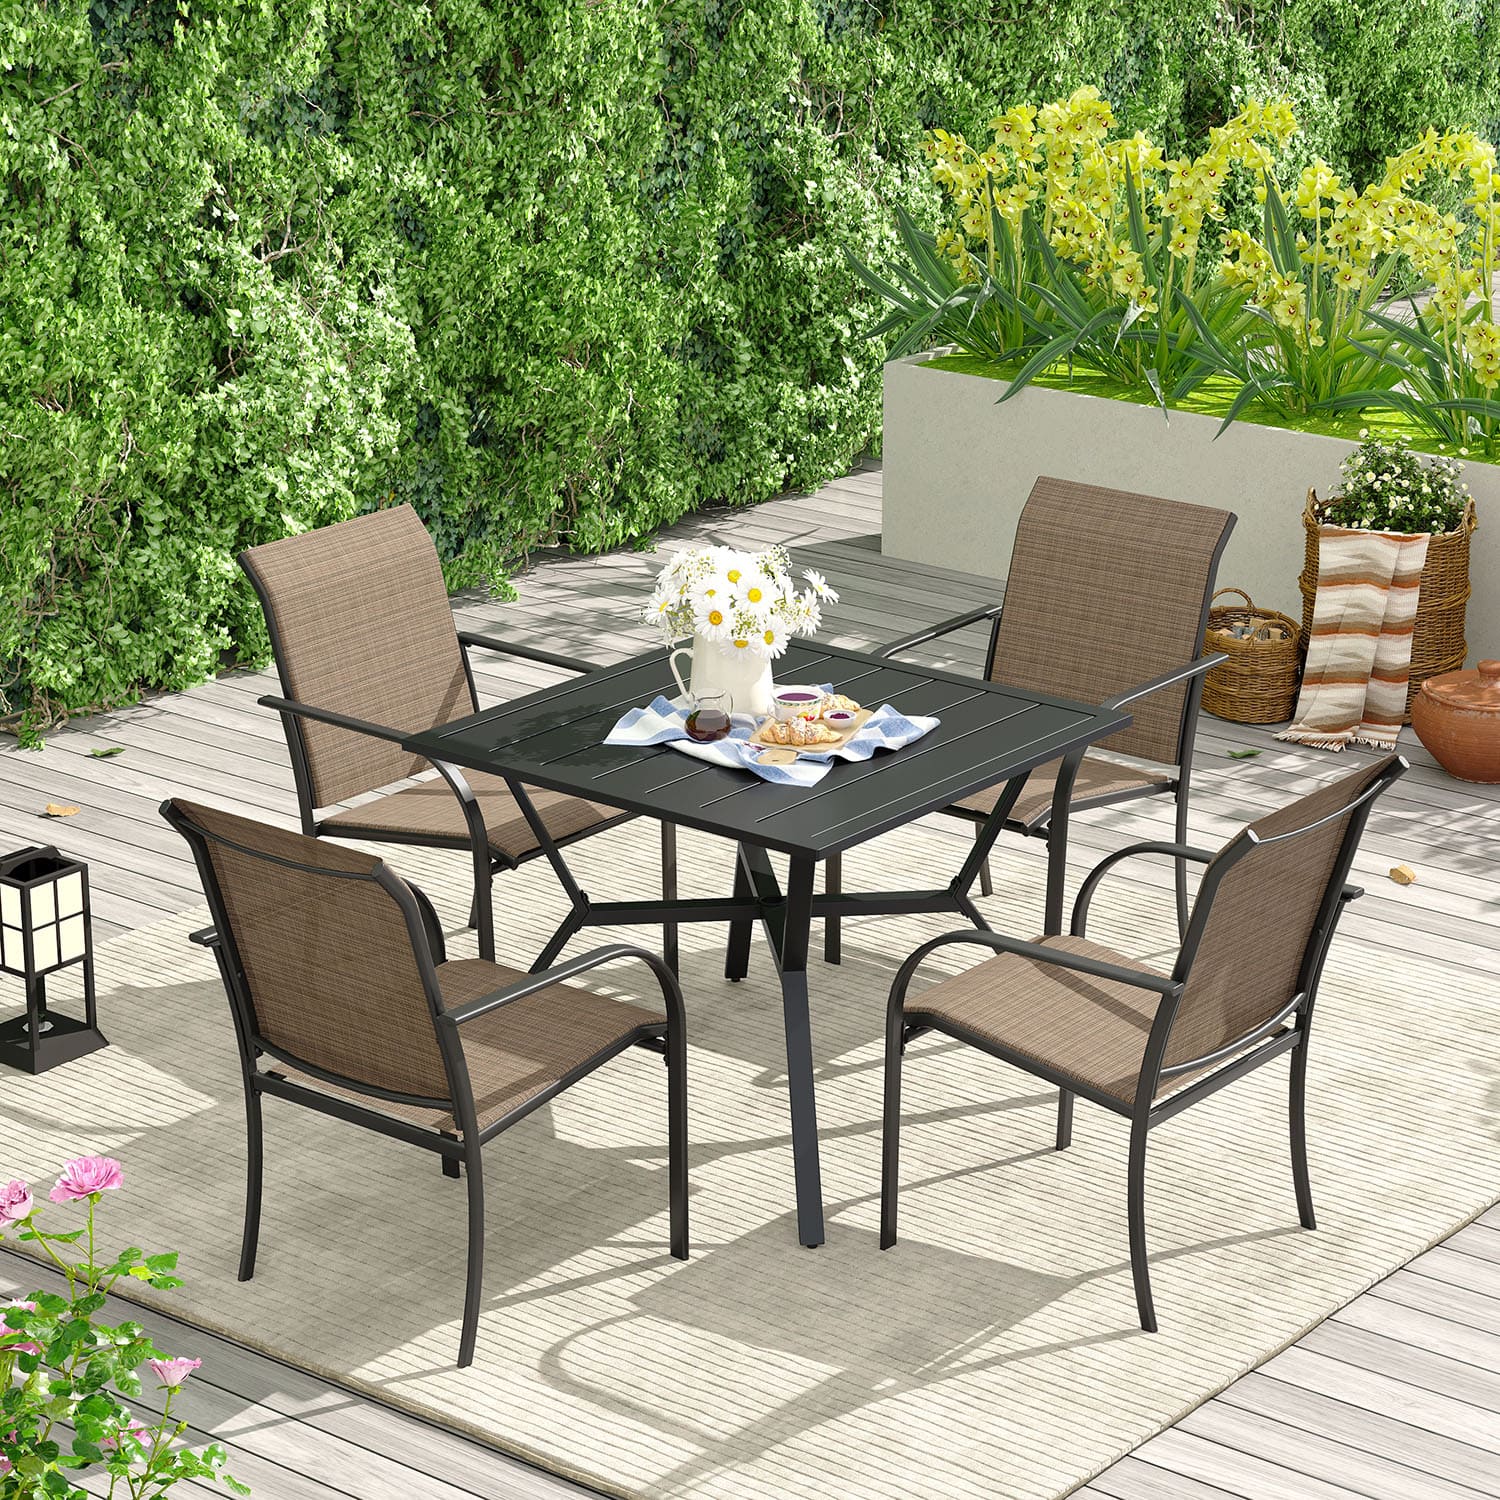 Vicllax 5 Pieces Patio Dining Set, Outdoor Square Table and Patio Stackable Sling Chairs